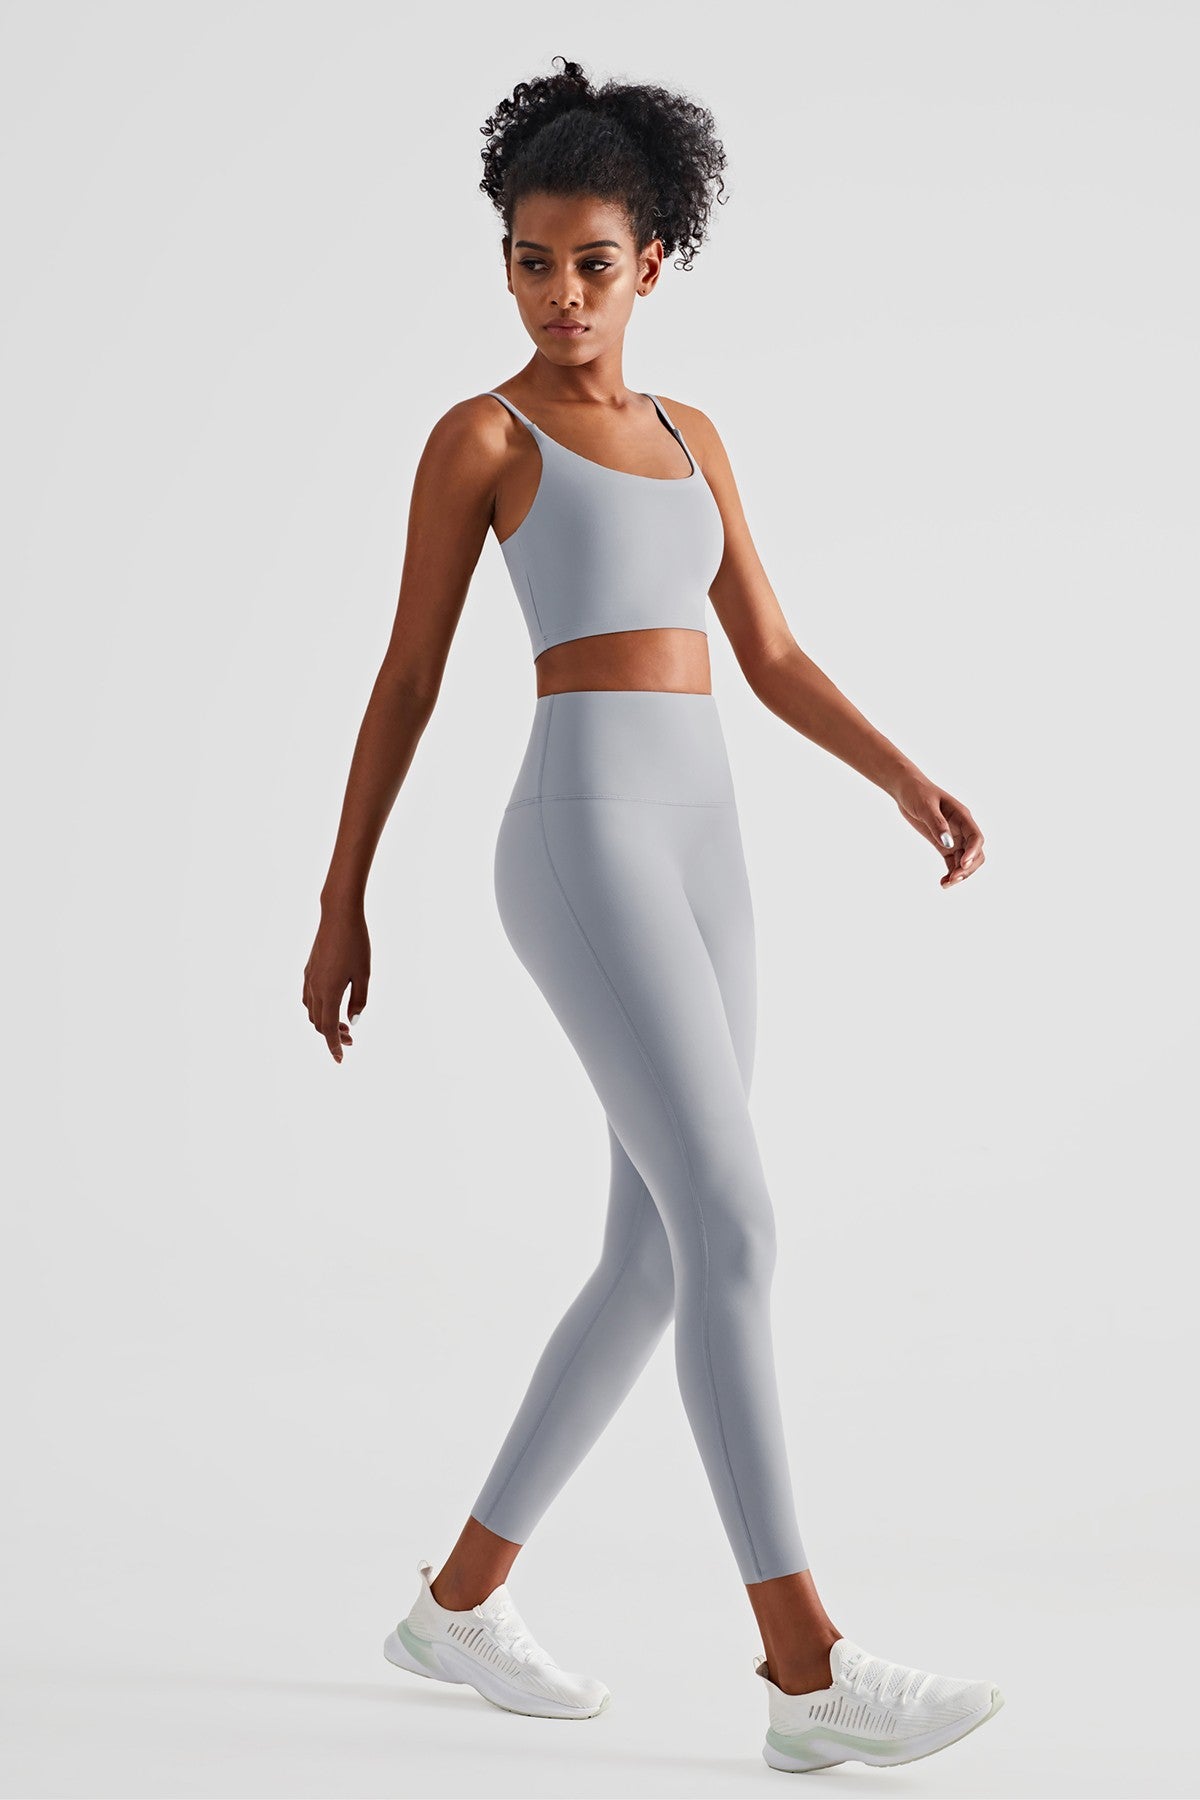 Lululemon set strappy back bra and crop leggings outfit Size 6 - $20 - From  Becky